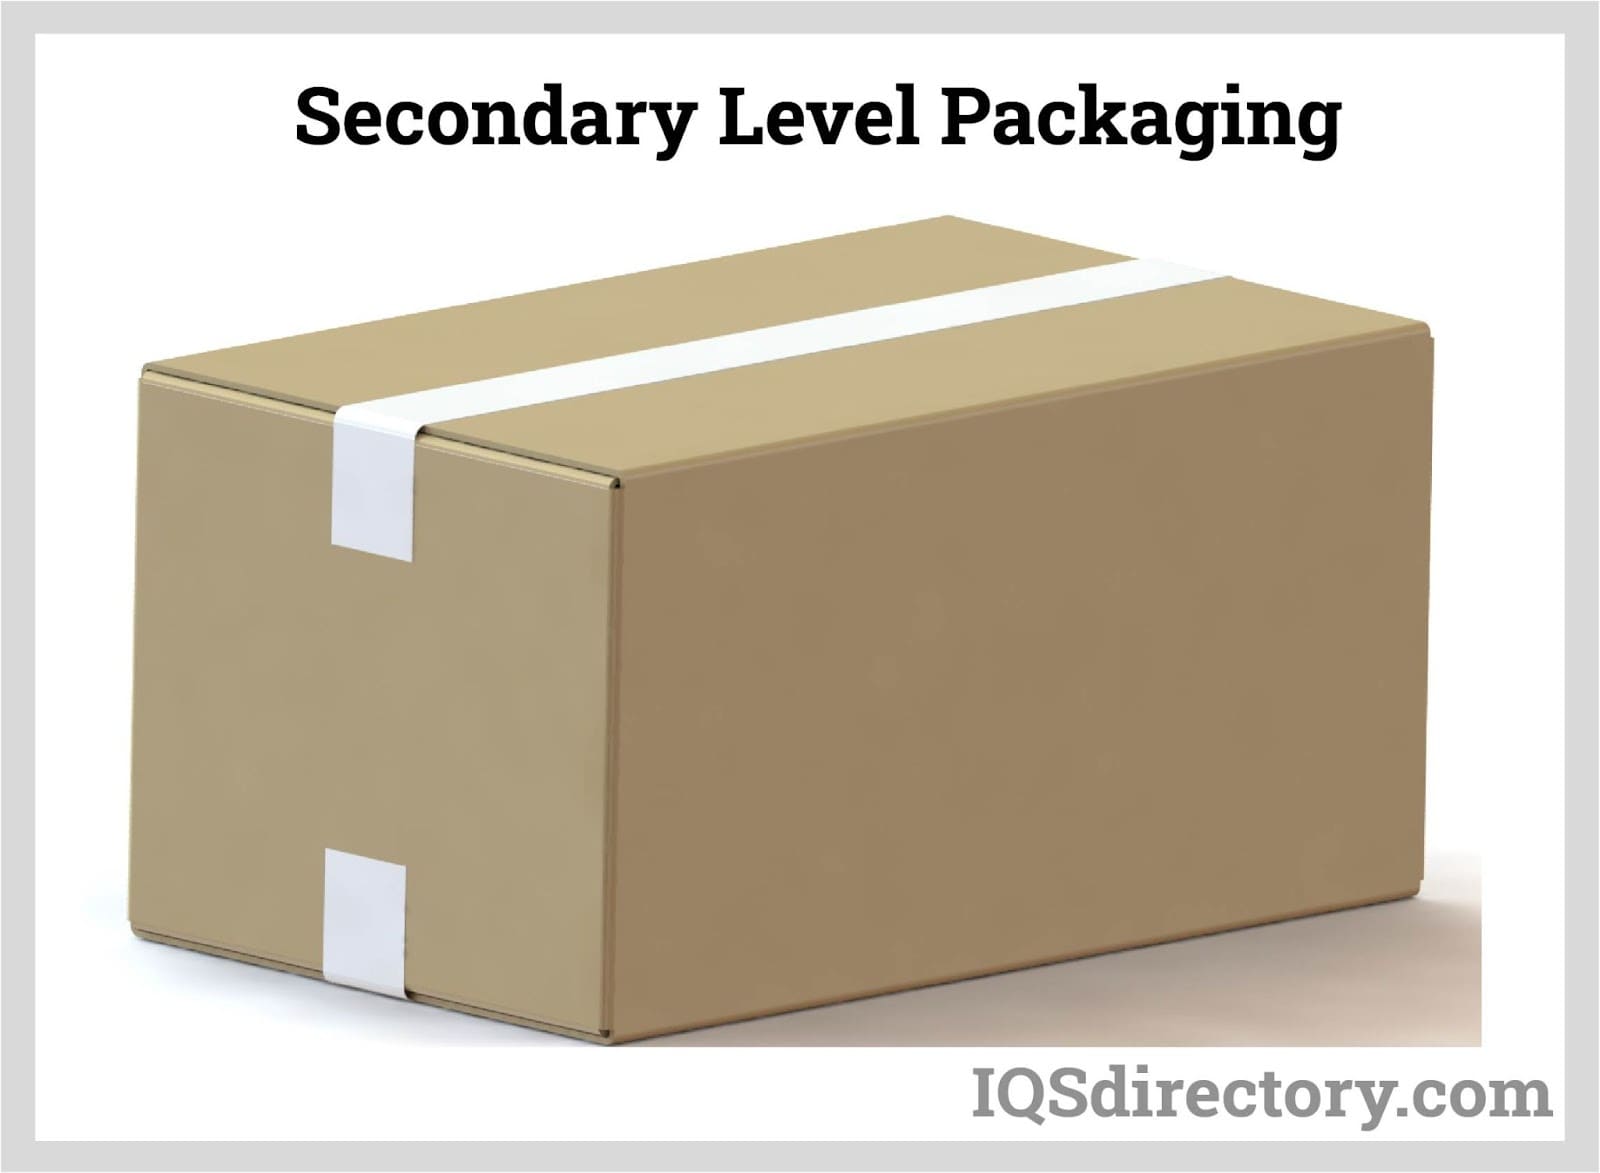 Secondary Level Packaging